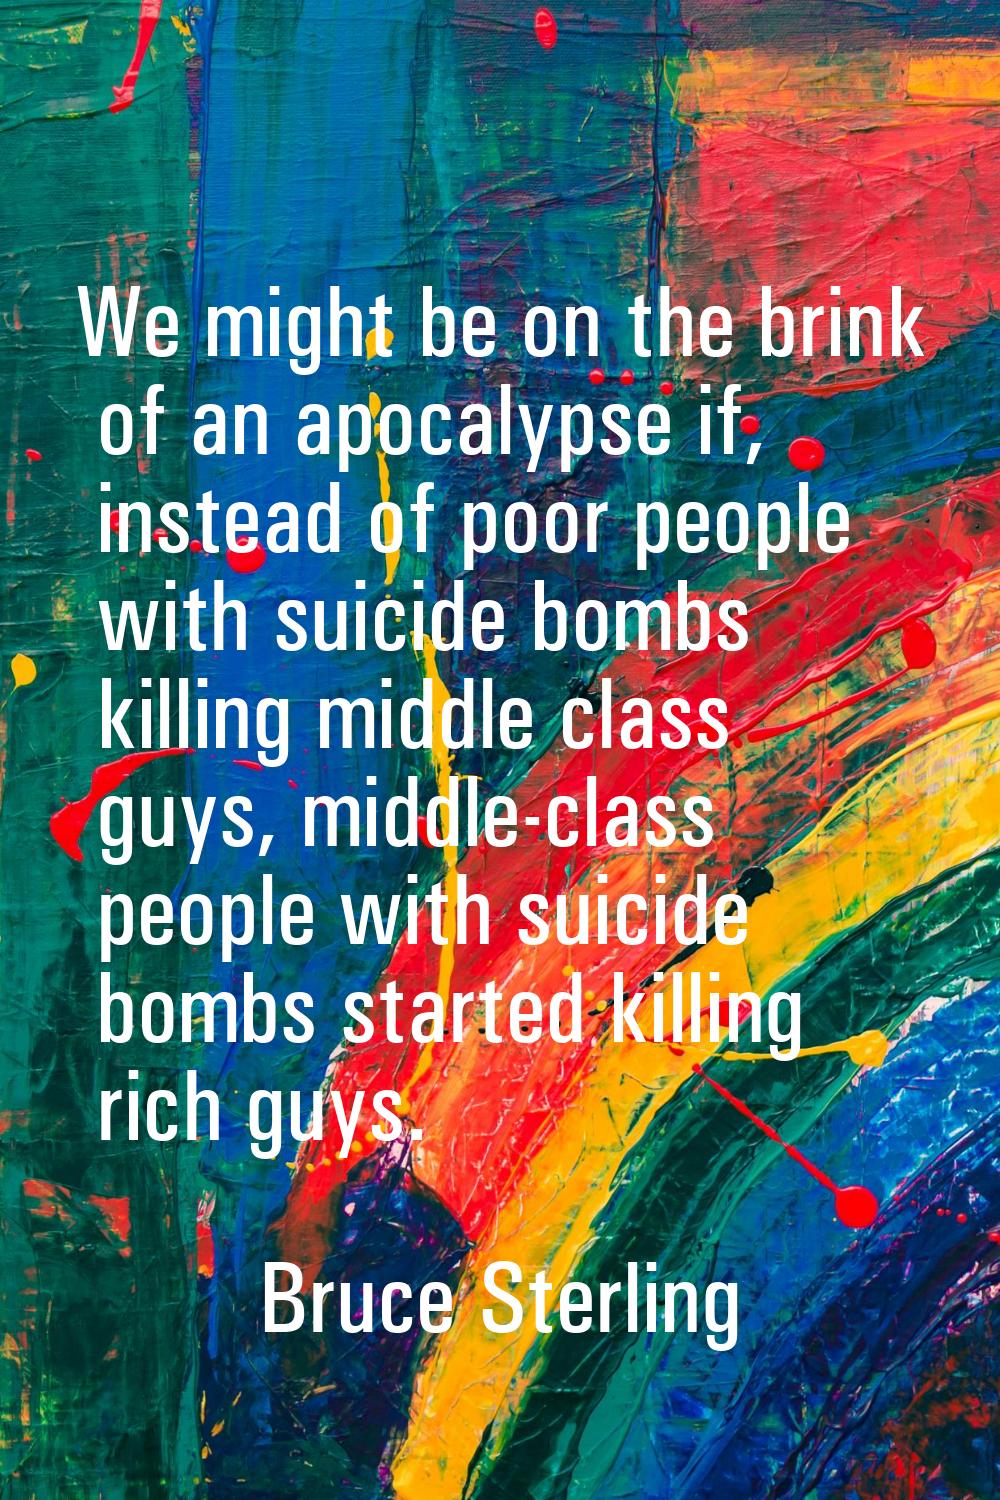 We might be on the brink of an apocalypse if, instead of poor people with suicide bombs killing mid